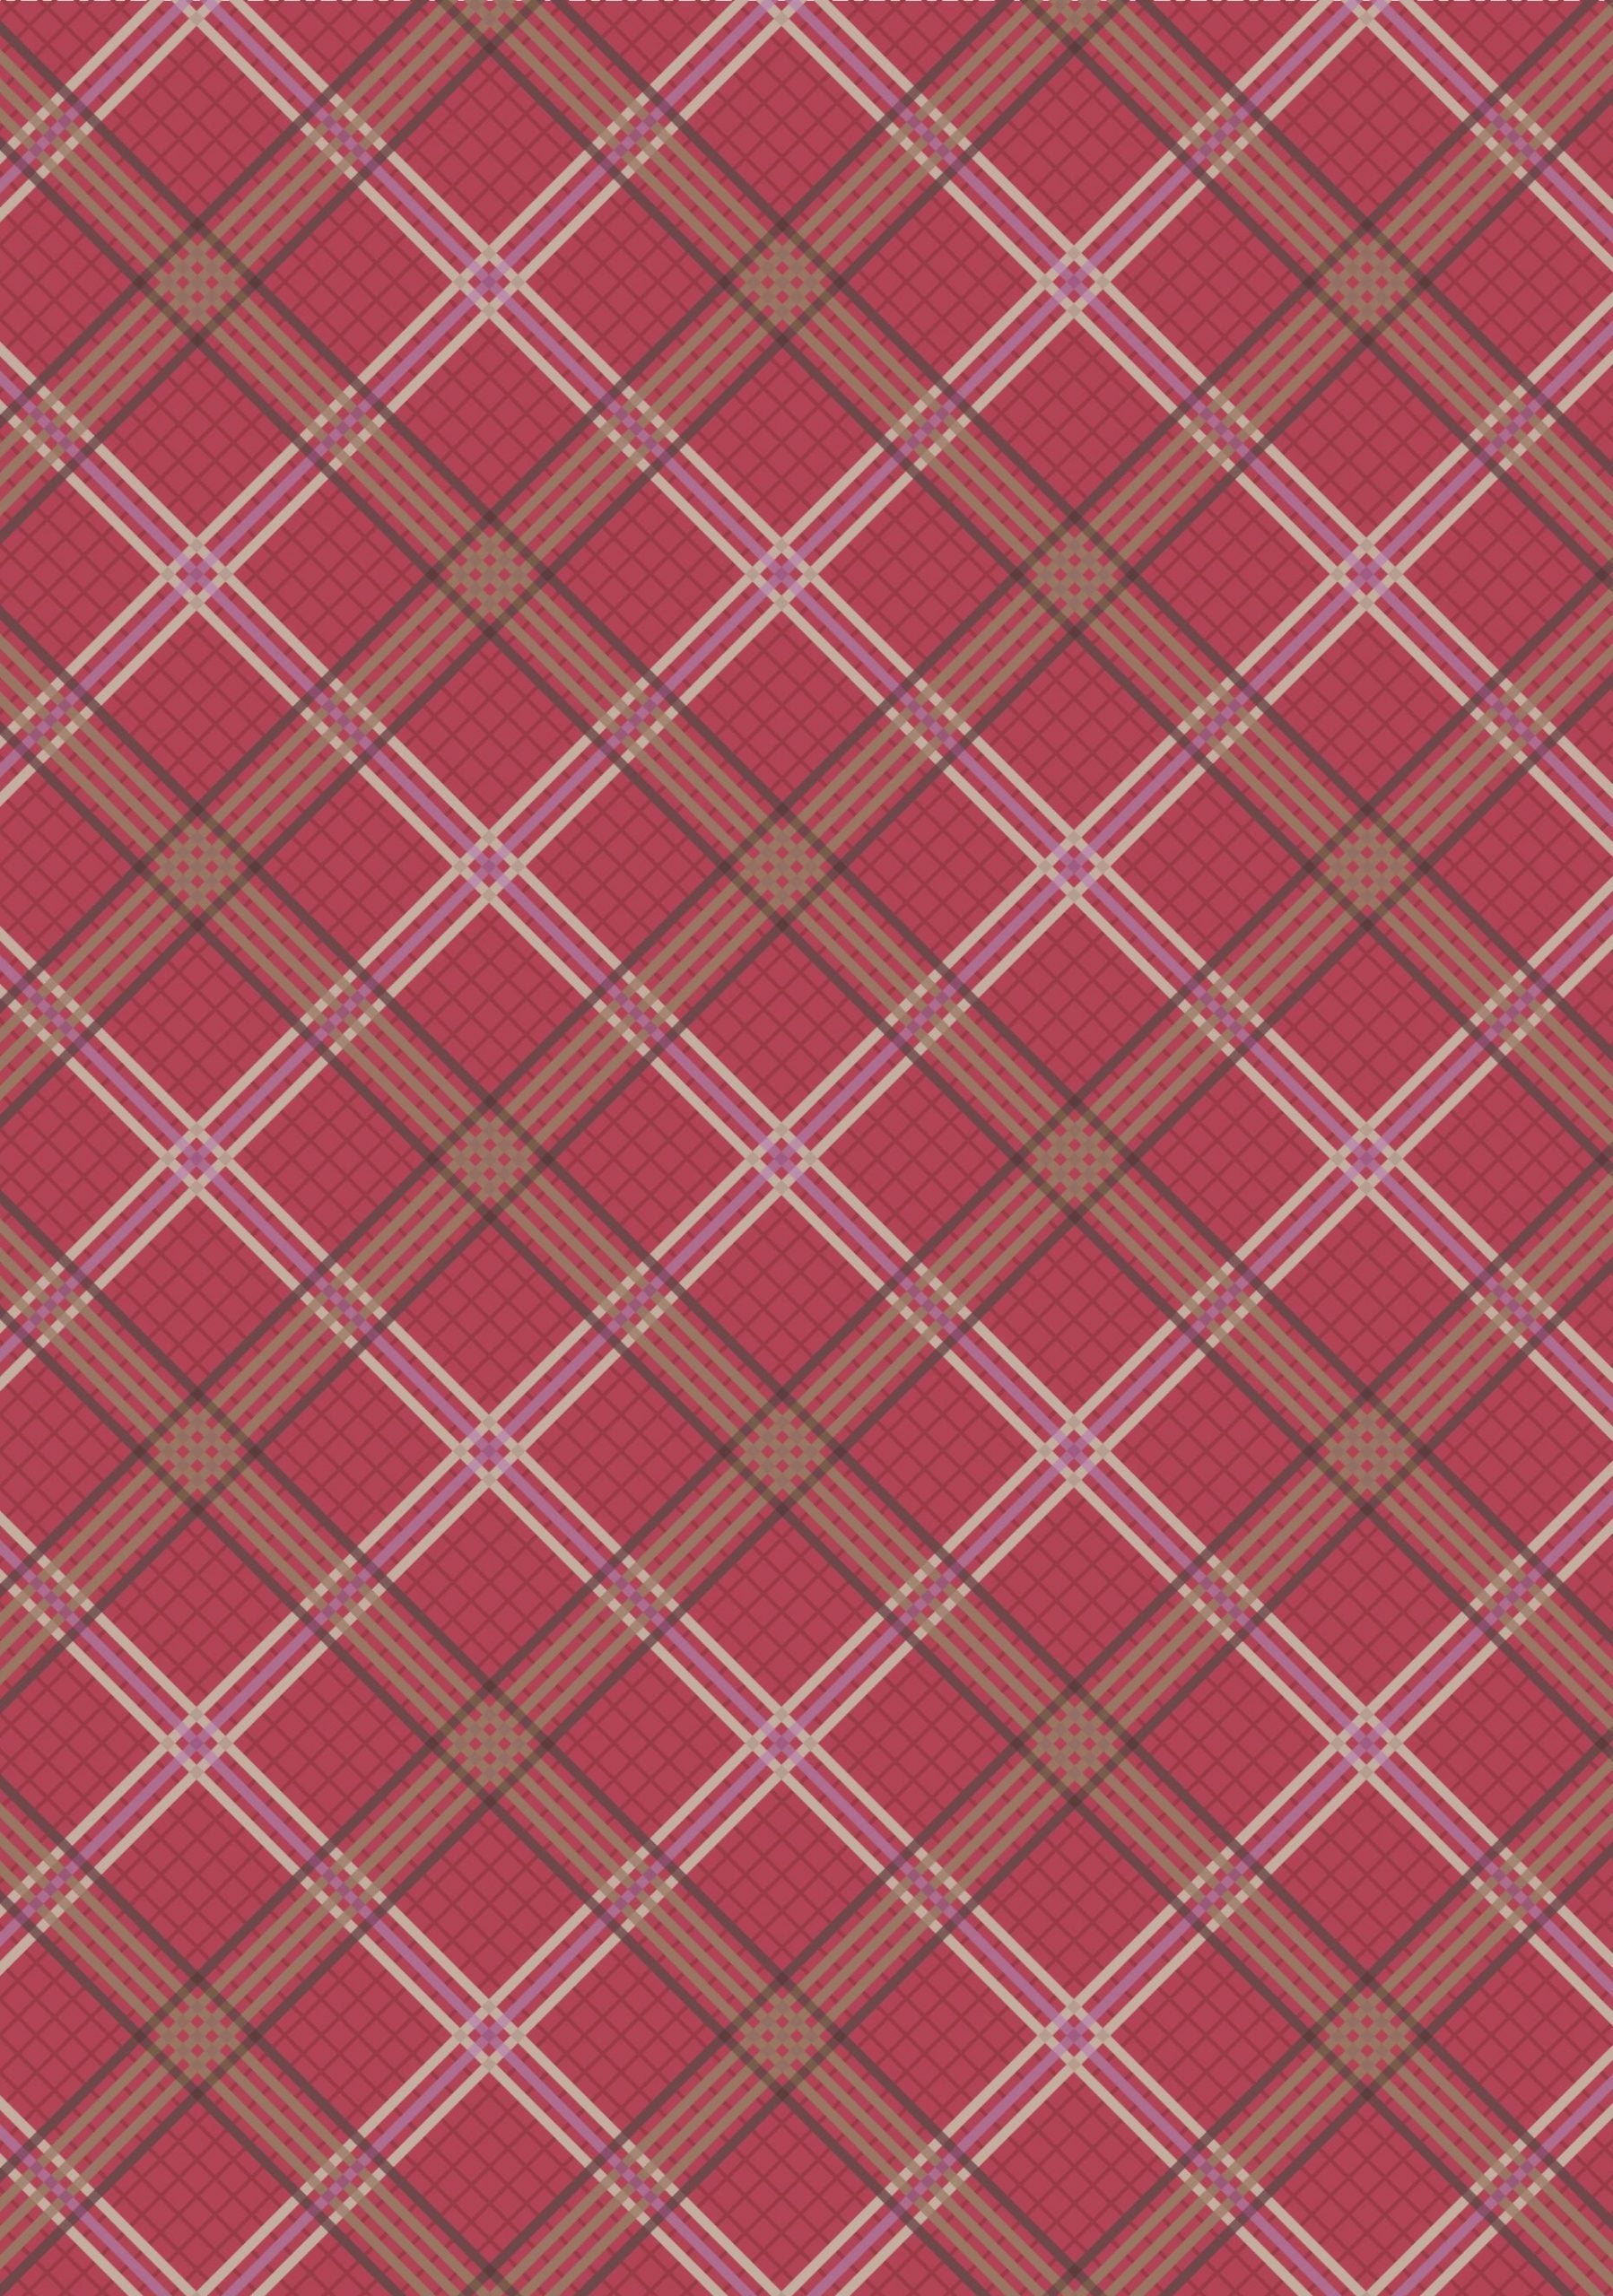 Lewis & Irene - Loch Lewis - A539.2 Loch Lewis Red Check Fabric